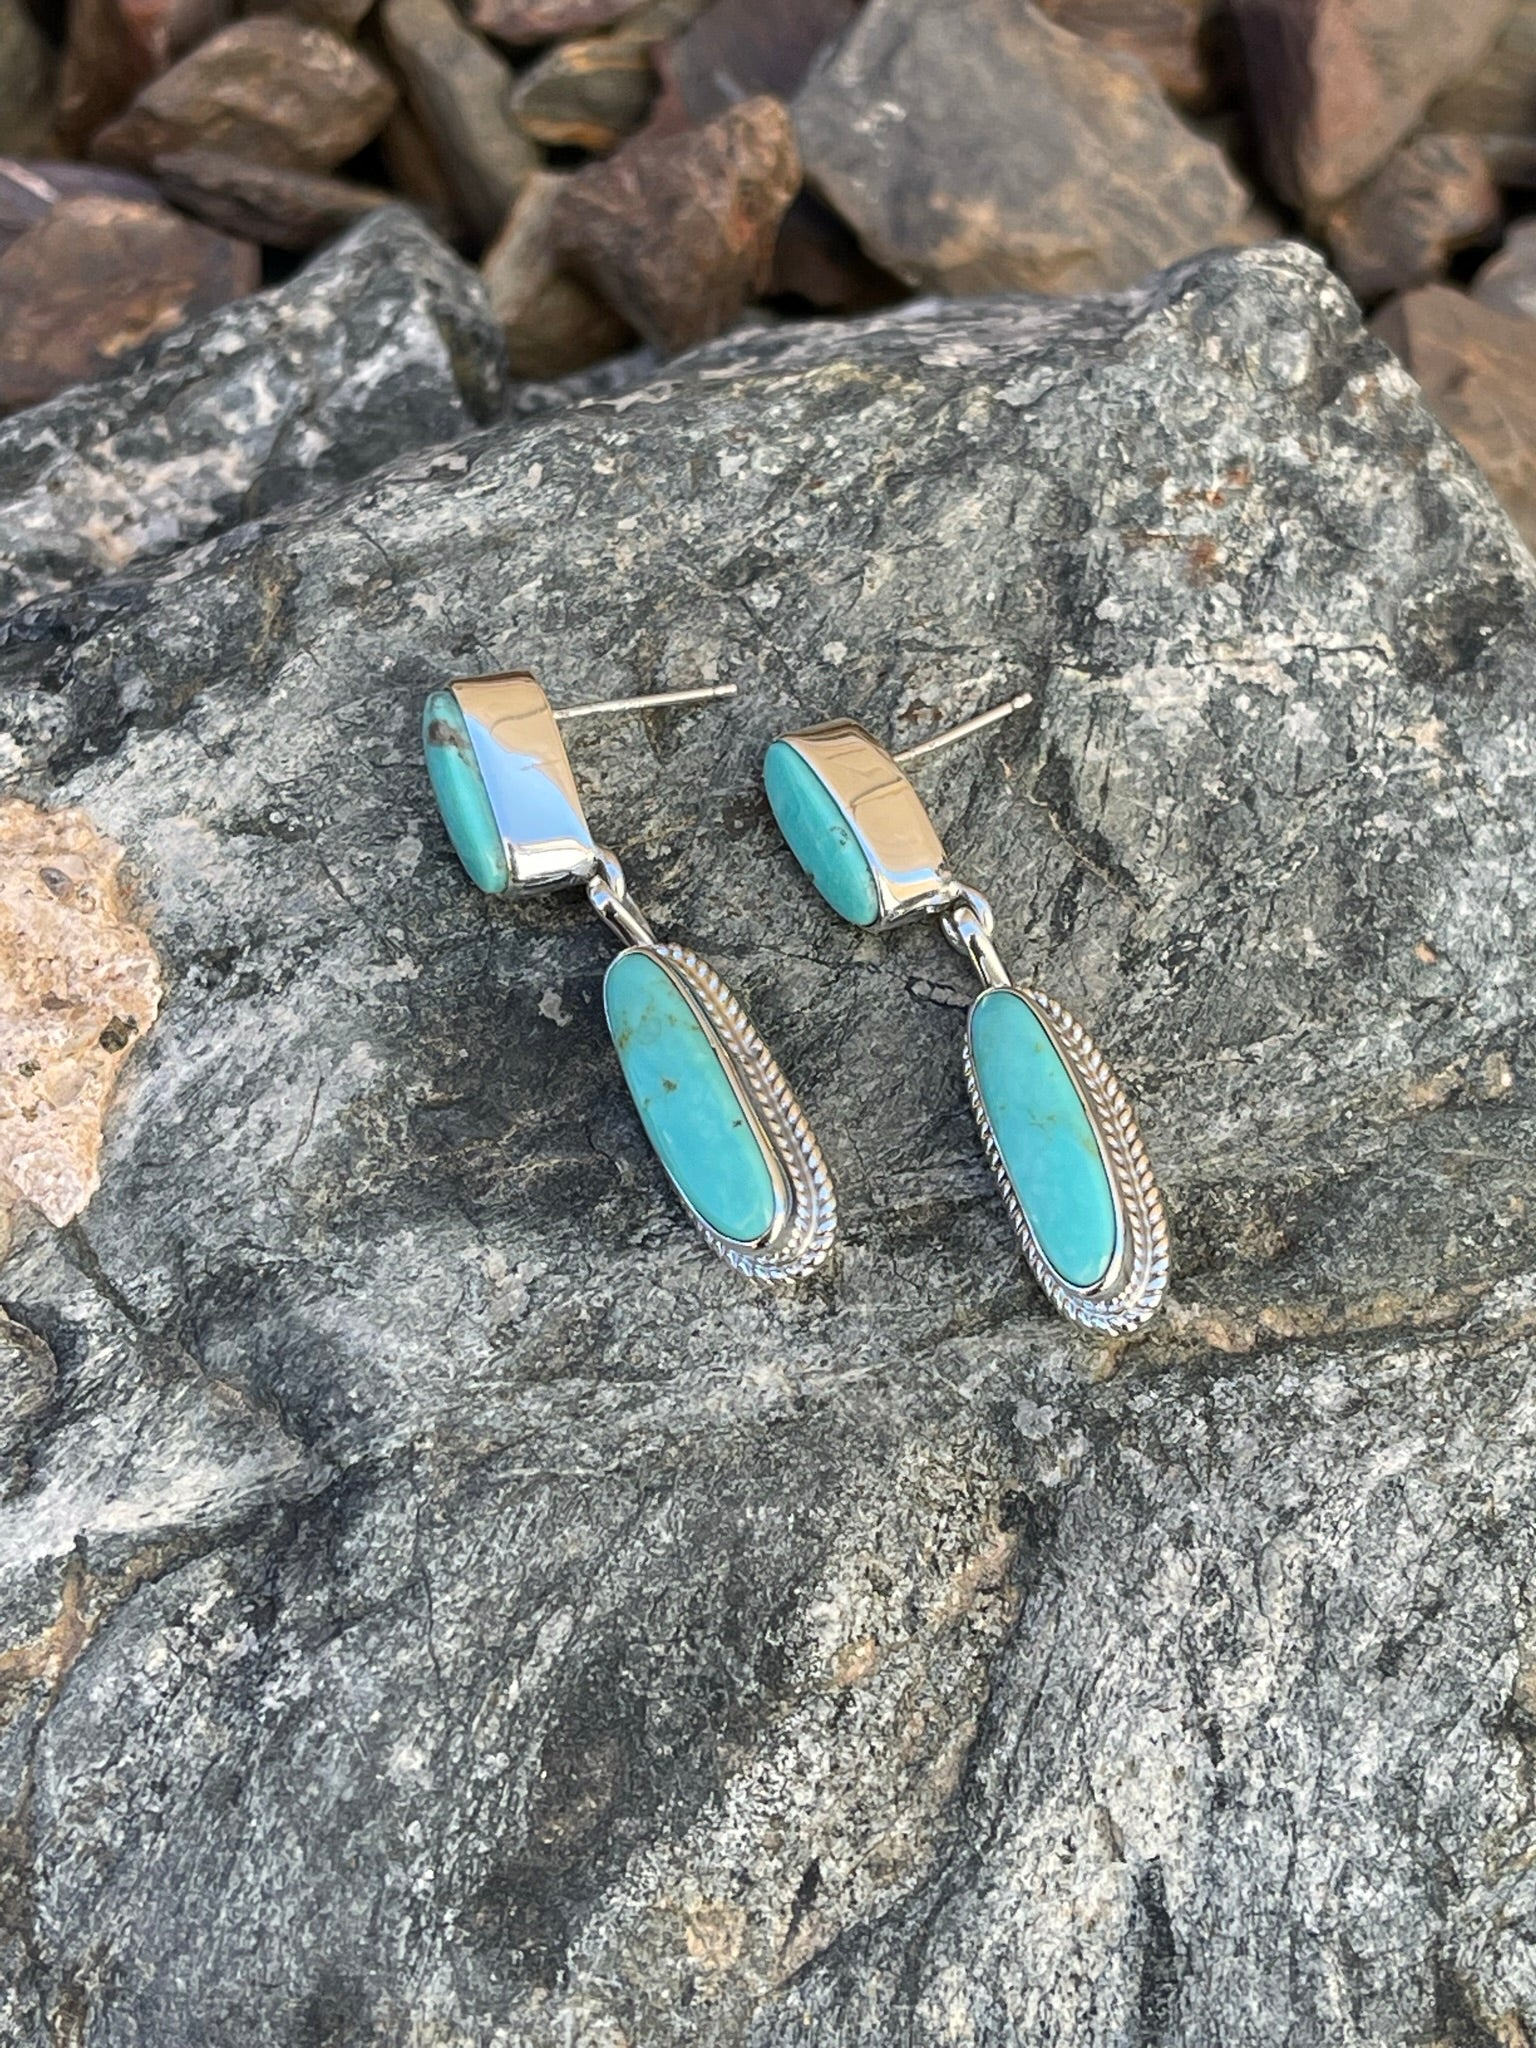 Handmade Sterling Silver Two Stone Kingman Turquoise Earrings with Twist Detail